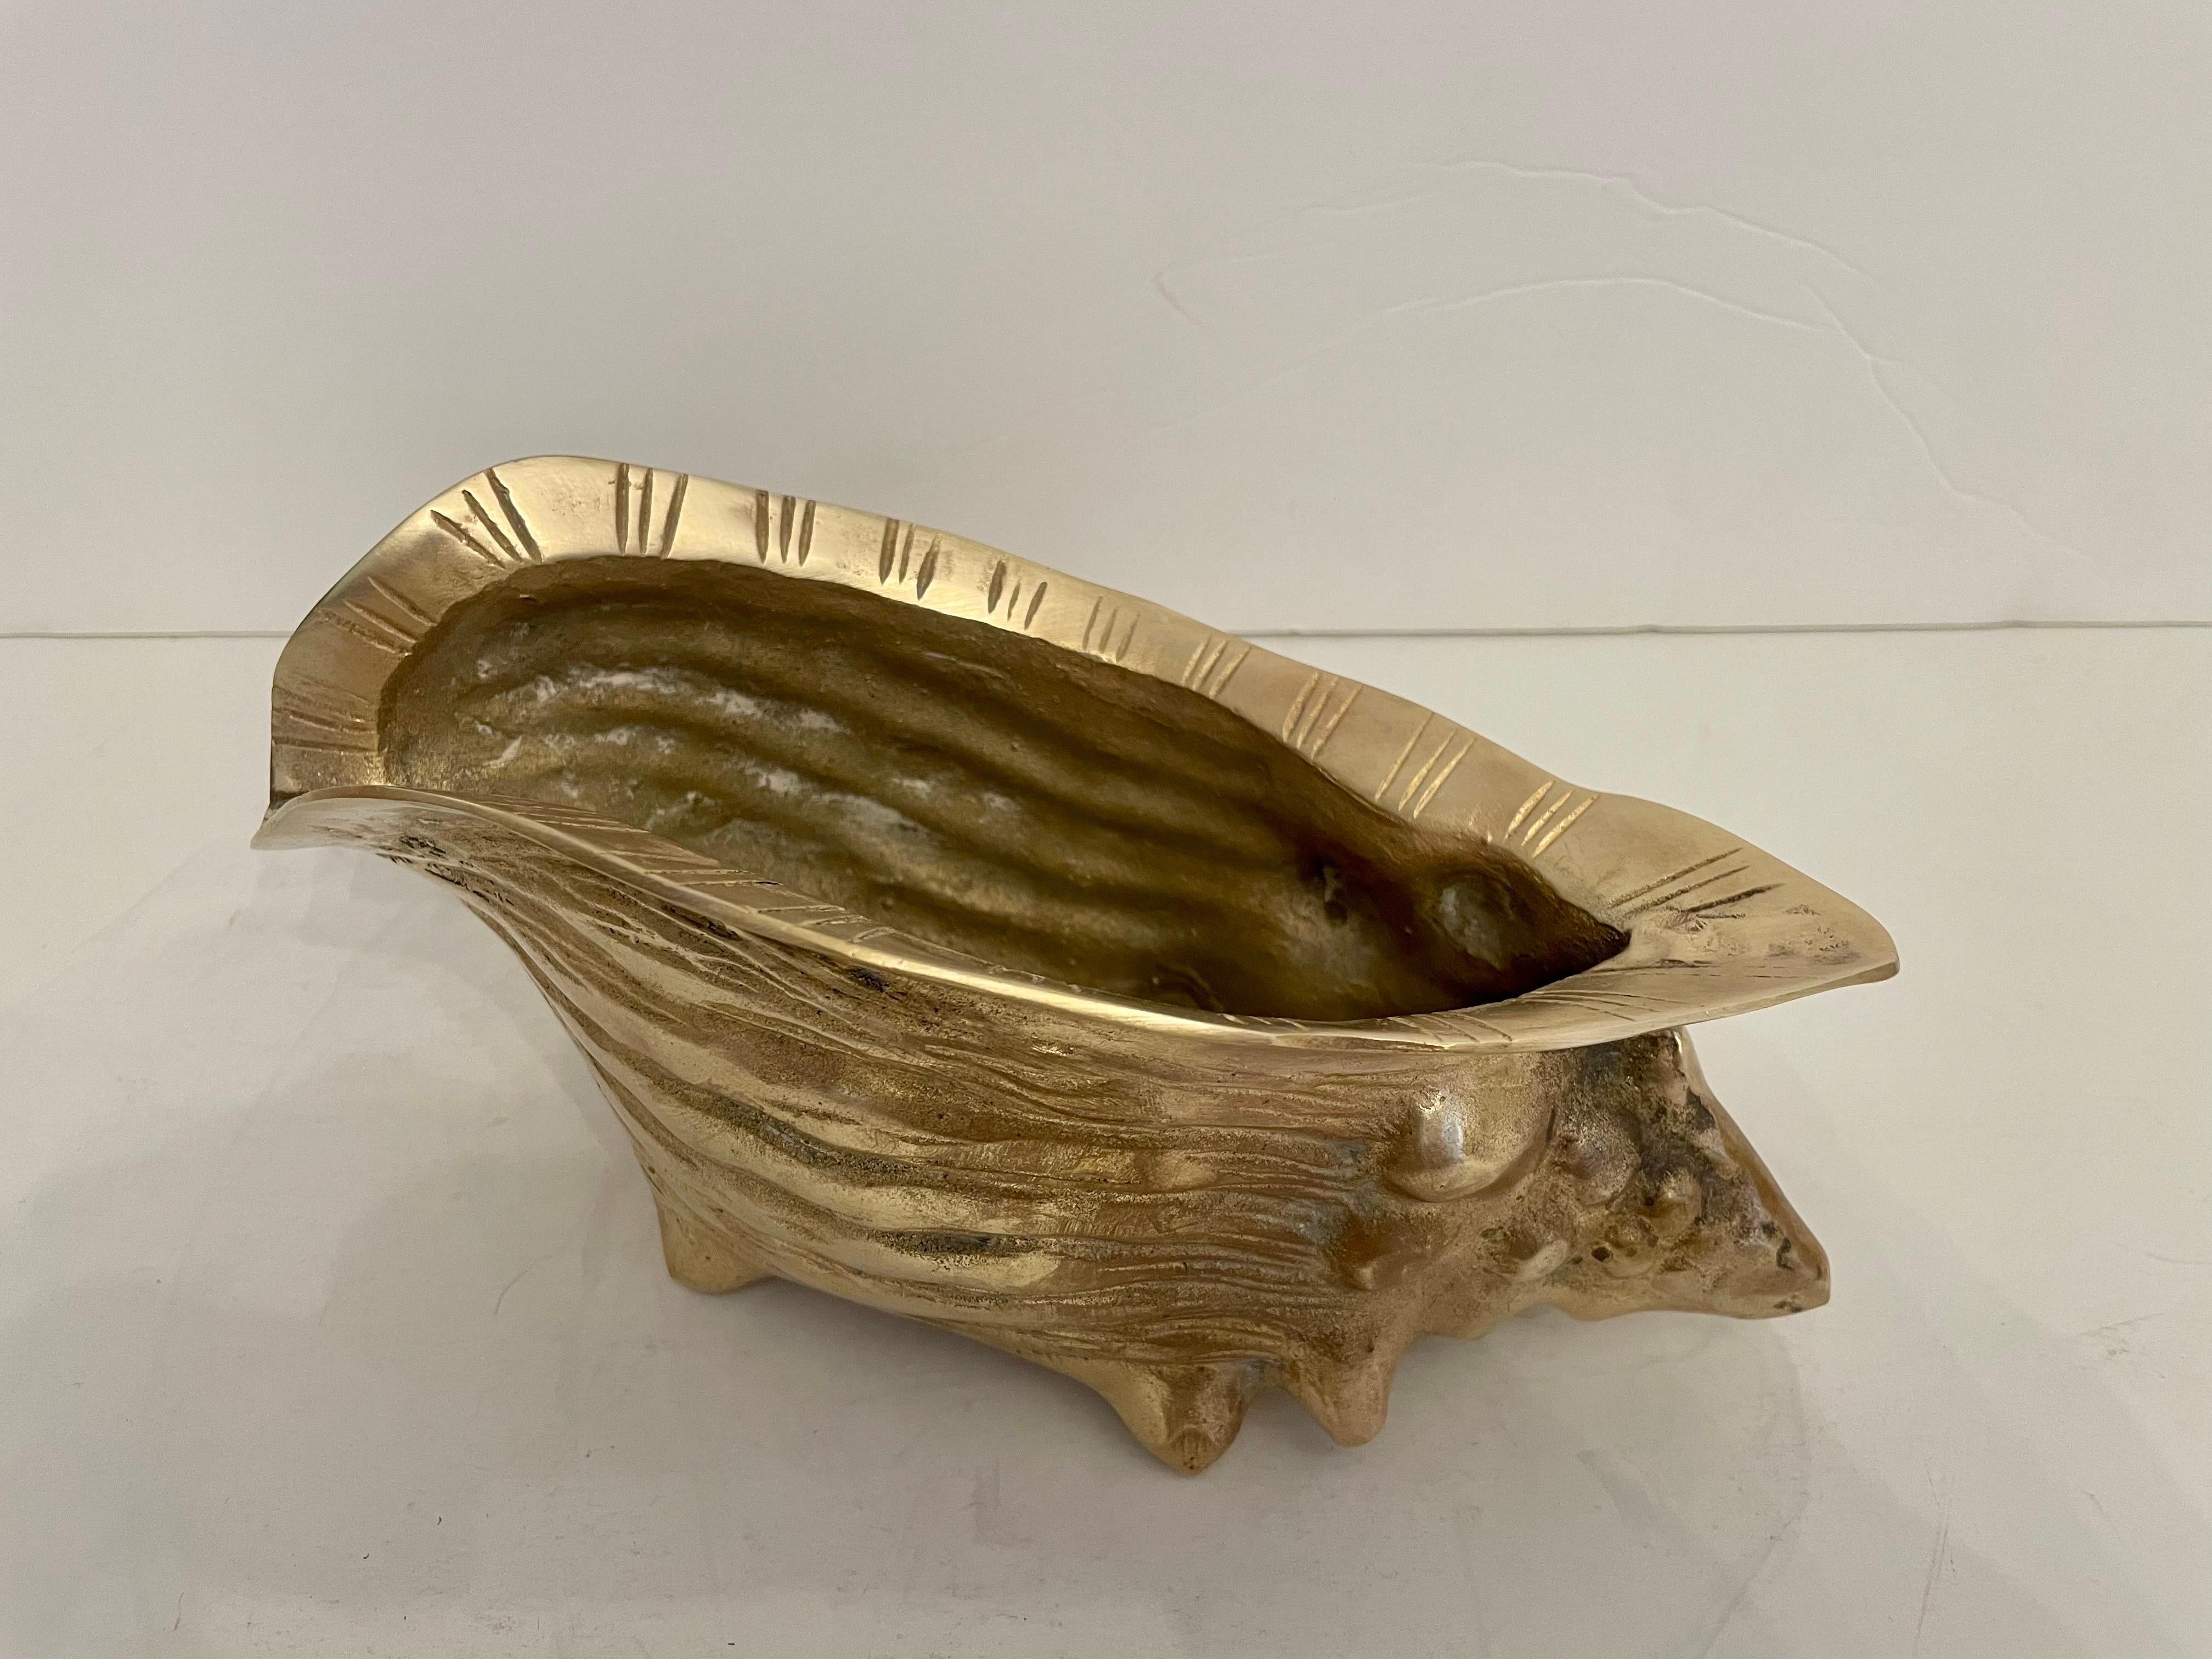 Hollywood Regency vintage brass seashell nautilus planter. Very detailed. Good overall condition with minor wear to from age and use. Can be used inside or out. Great for air plants. 9” wide x 4.5 wide x 4” tall. Hand polished.